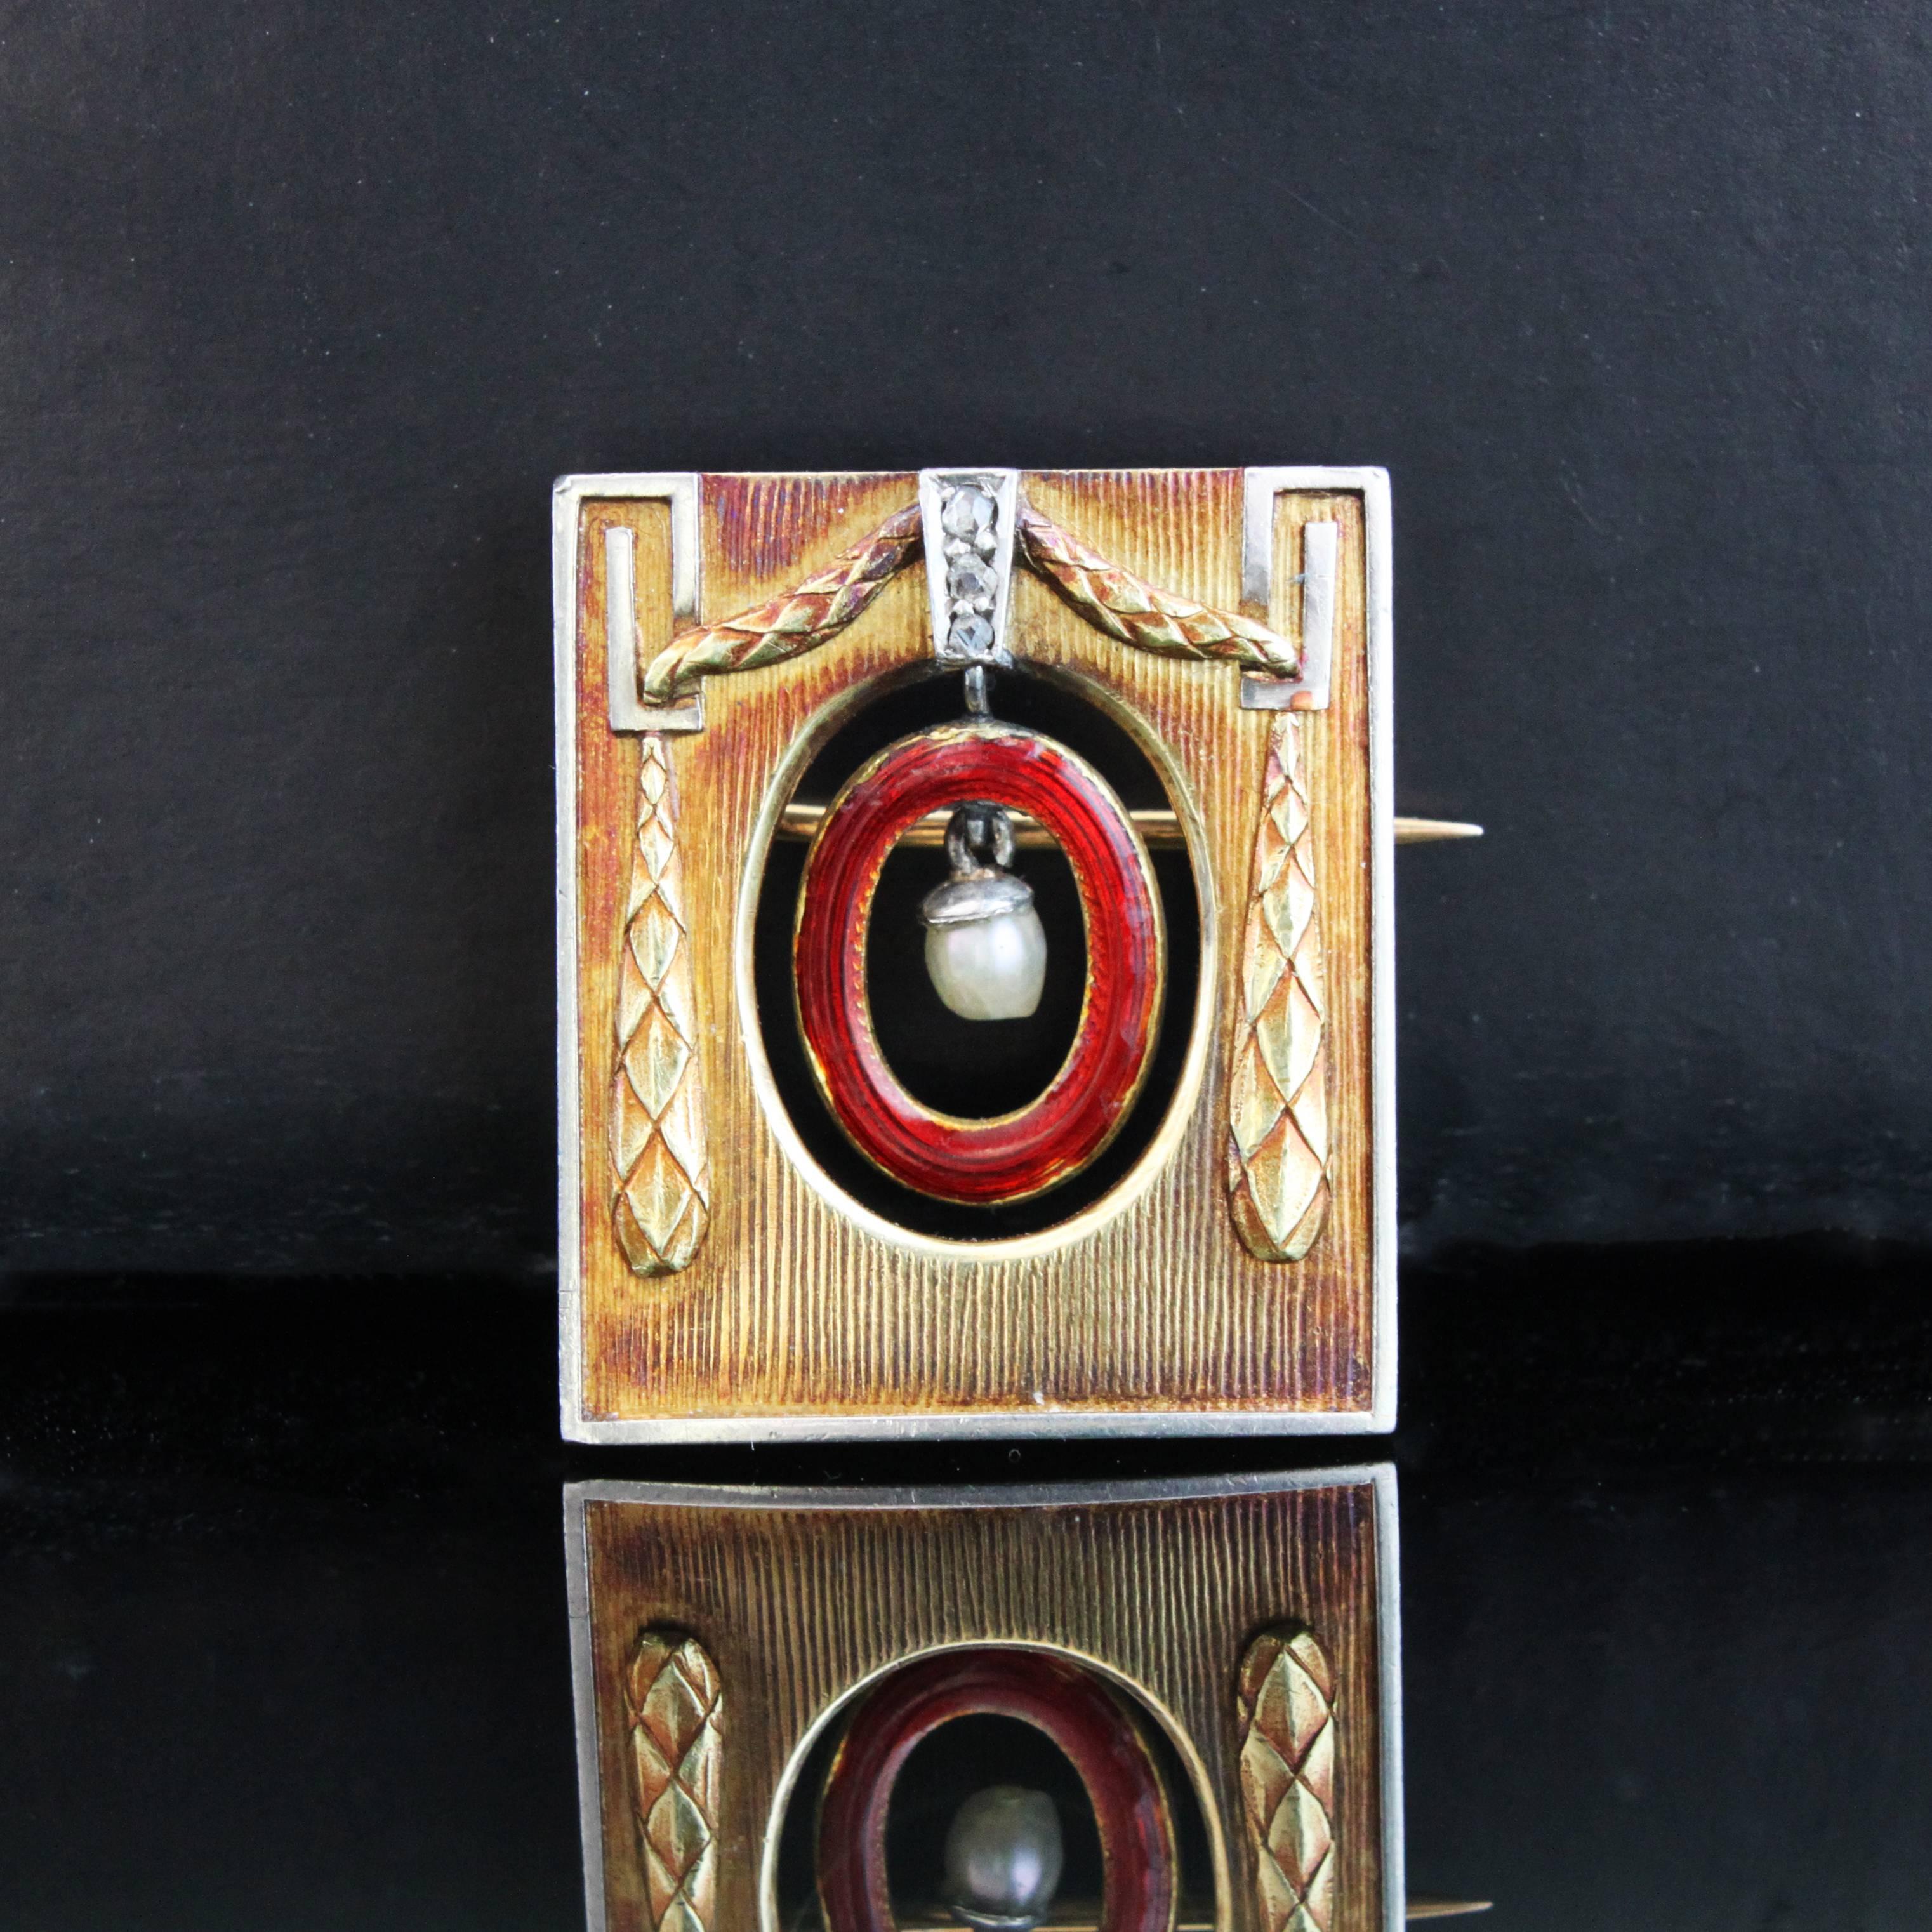 A beautiful and rare 18k gold brooch by Theodor Fahrner, in a rectangular gateway design, with a pearl and a red enamelled ring around it in the center, hinged to a diamond-set column and surrounded by curtain-shaped gold work.

Theodor Fahrner